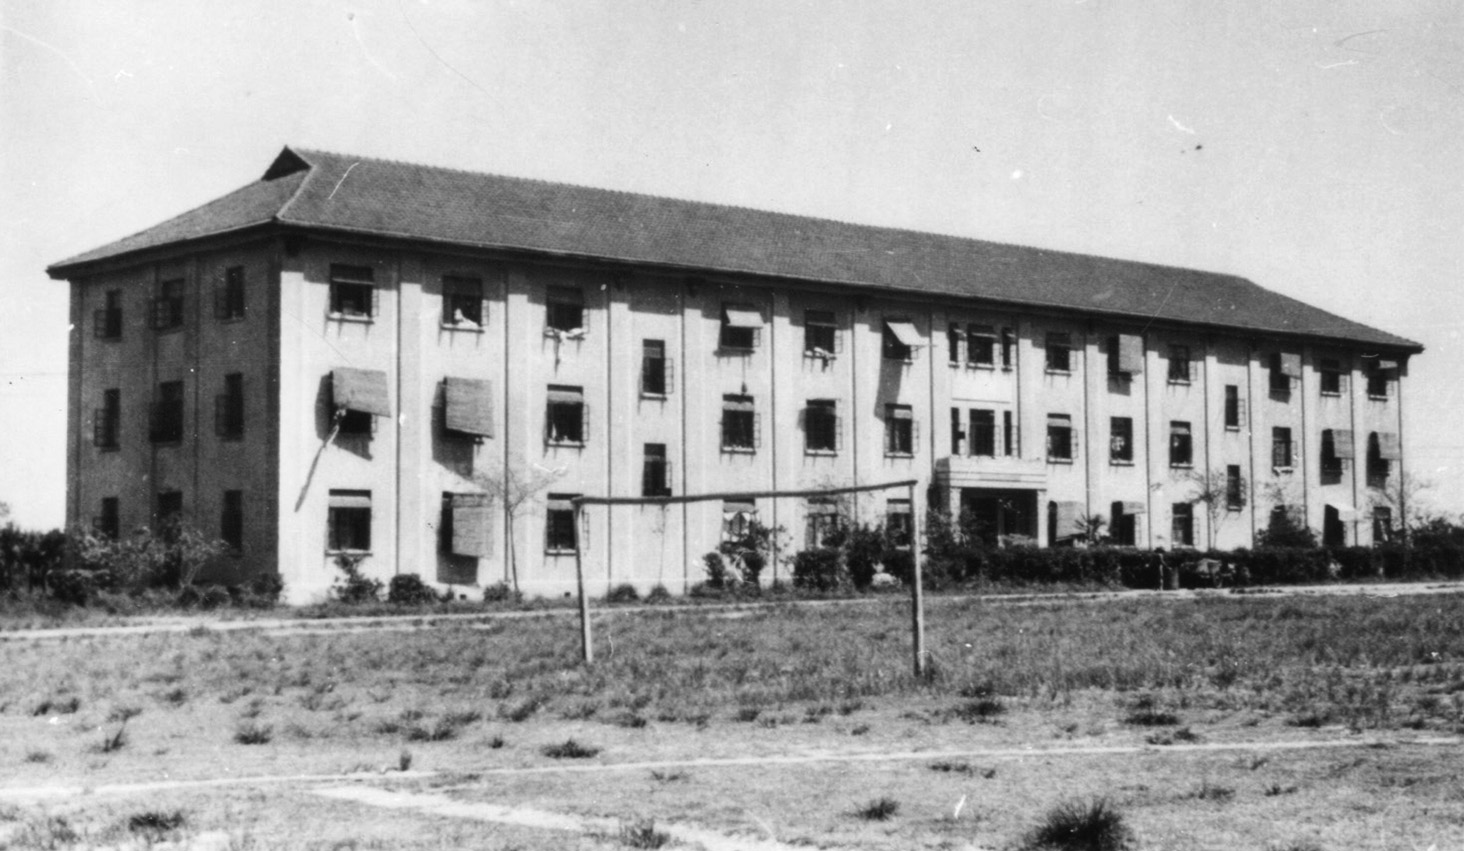 The Borsberry family was incarcerated by the Japanese in this college dormitory at the Lungwha Civil Assembly Centre in China. 